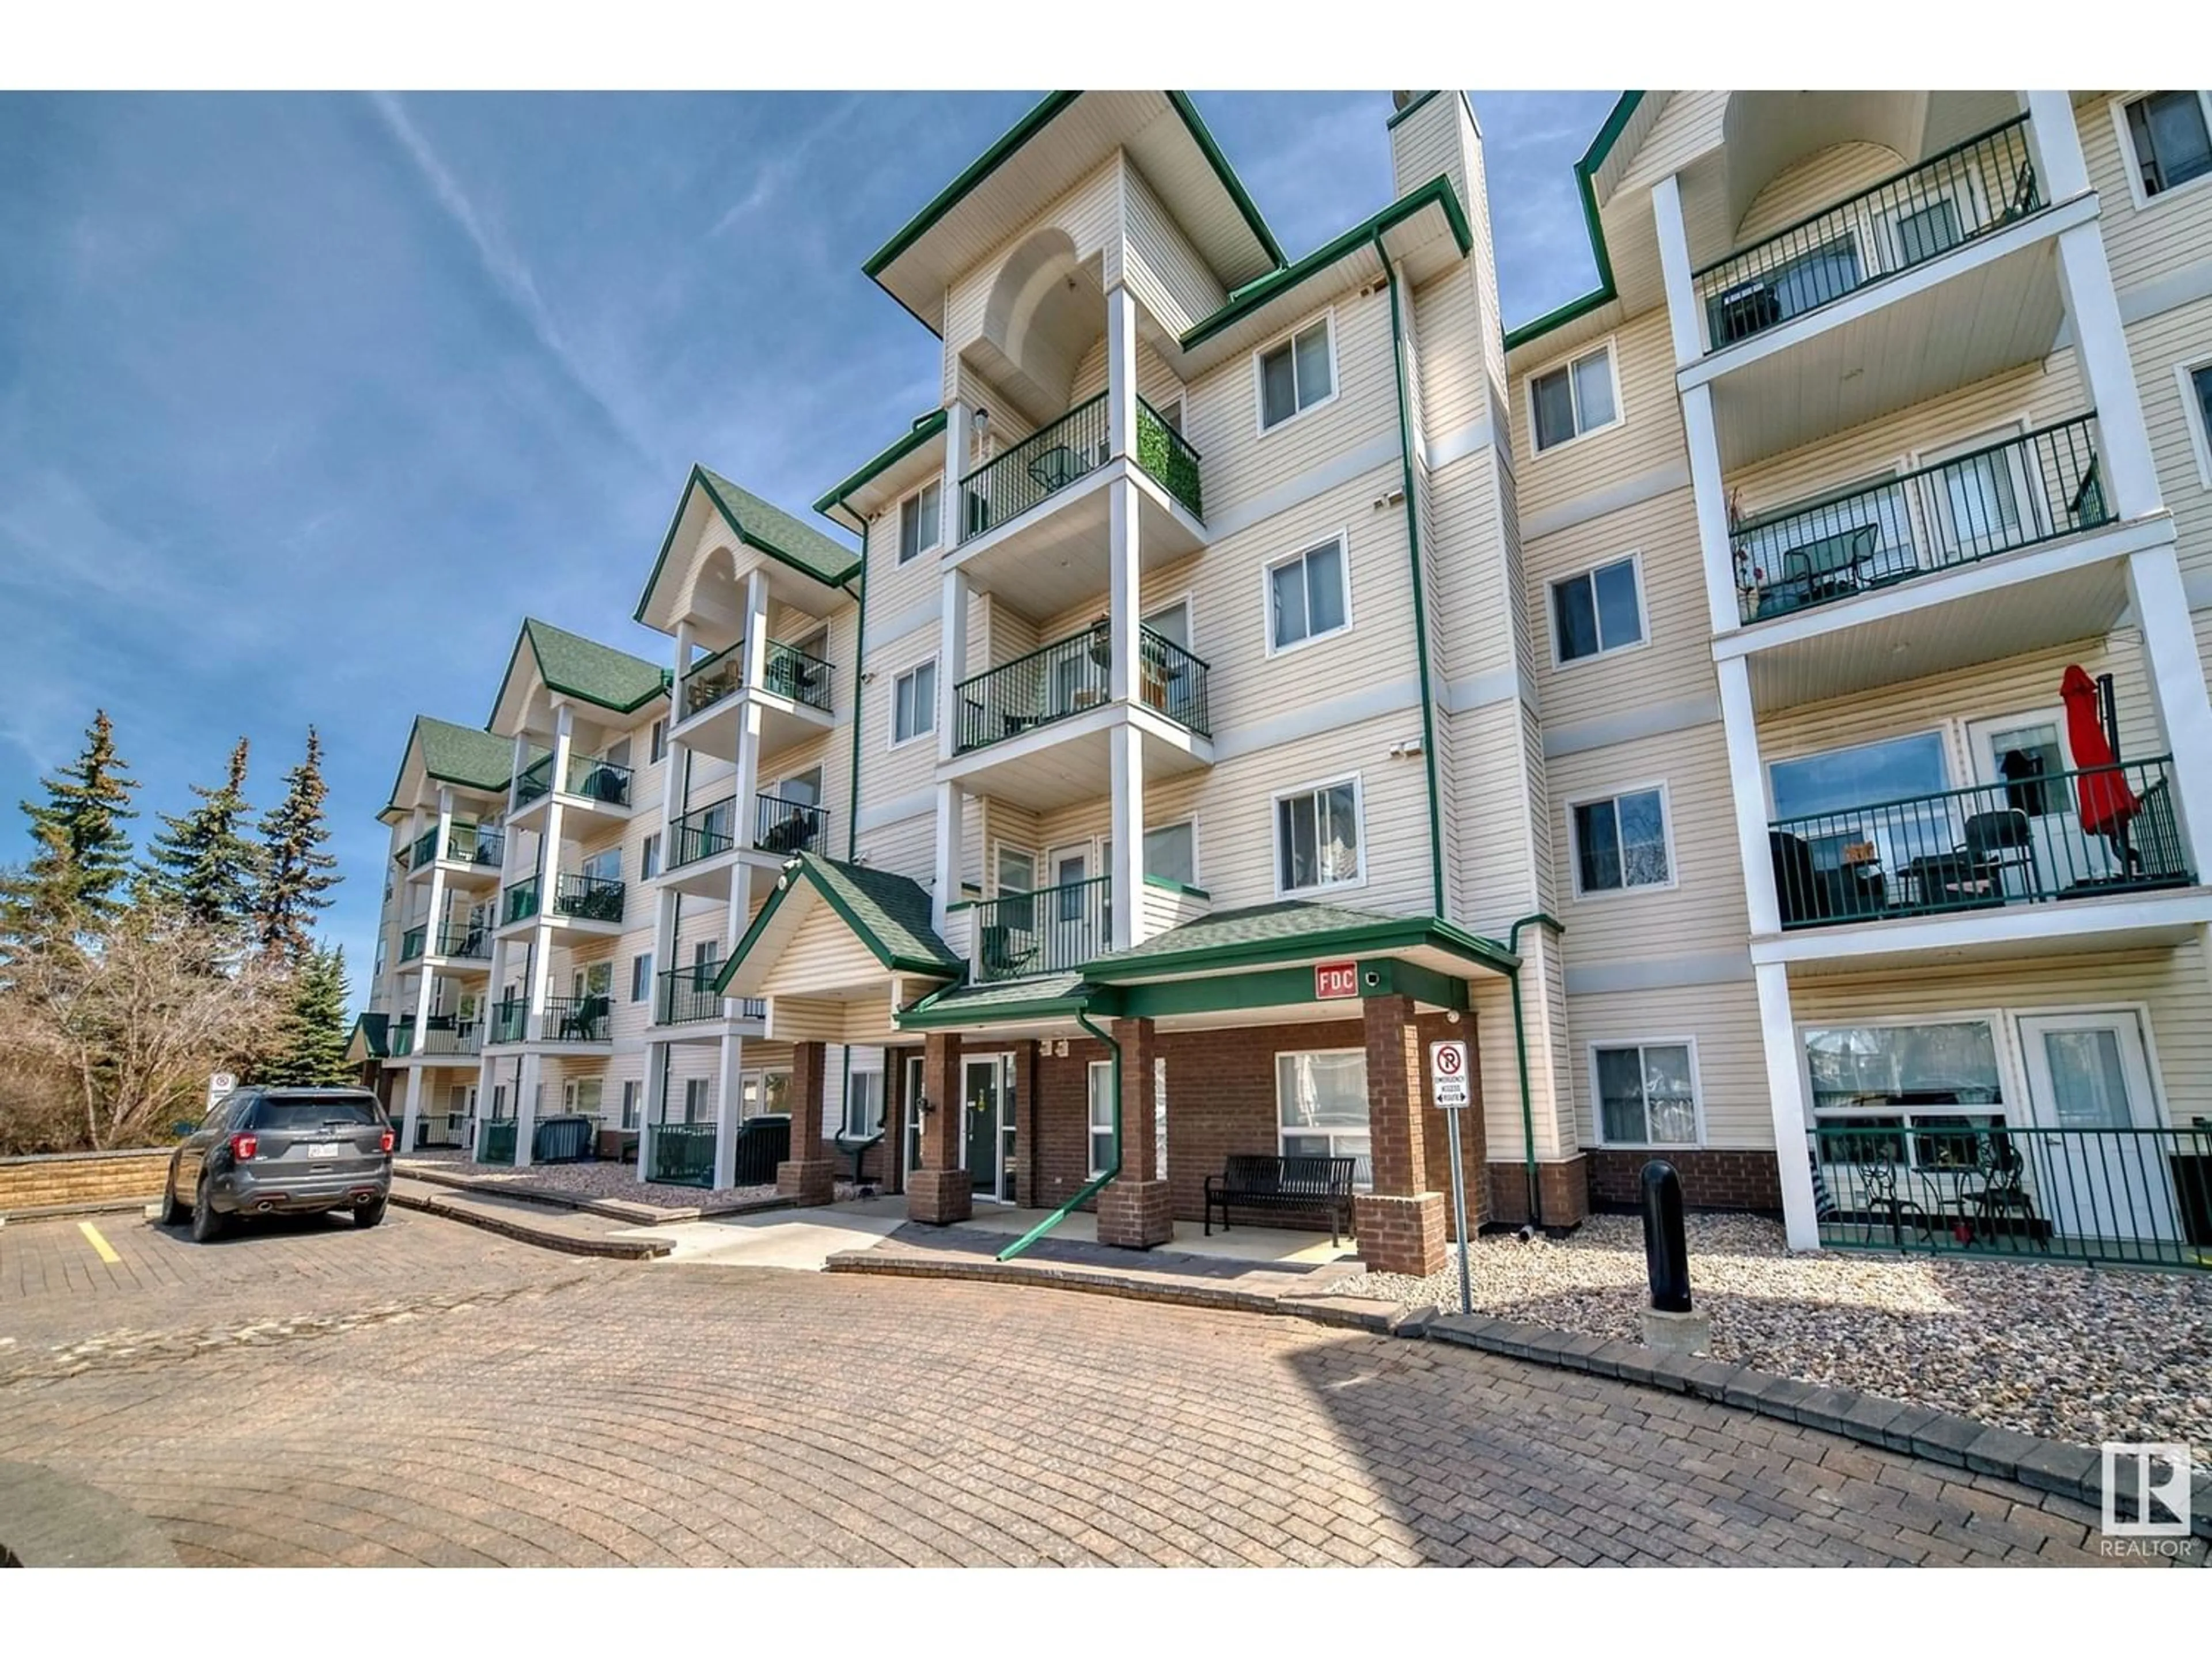 A pic from exterior of the house or condo for #317 13625 34 ST NW, Edmonton Alberta T5A0E3